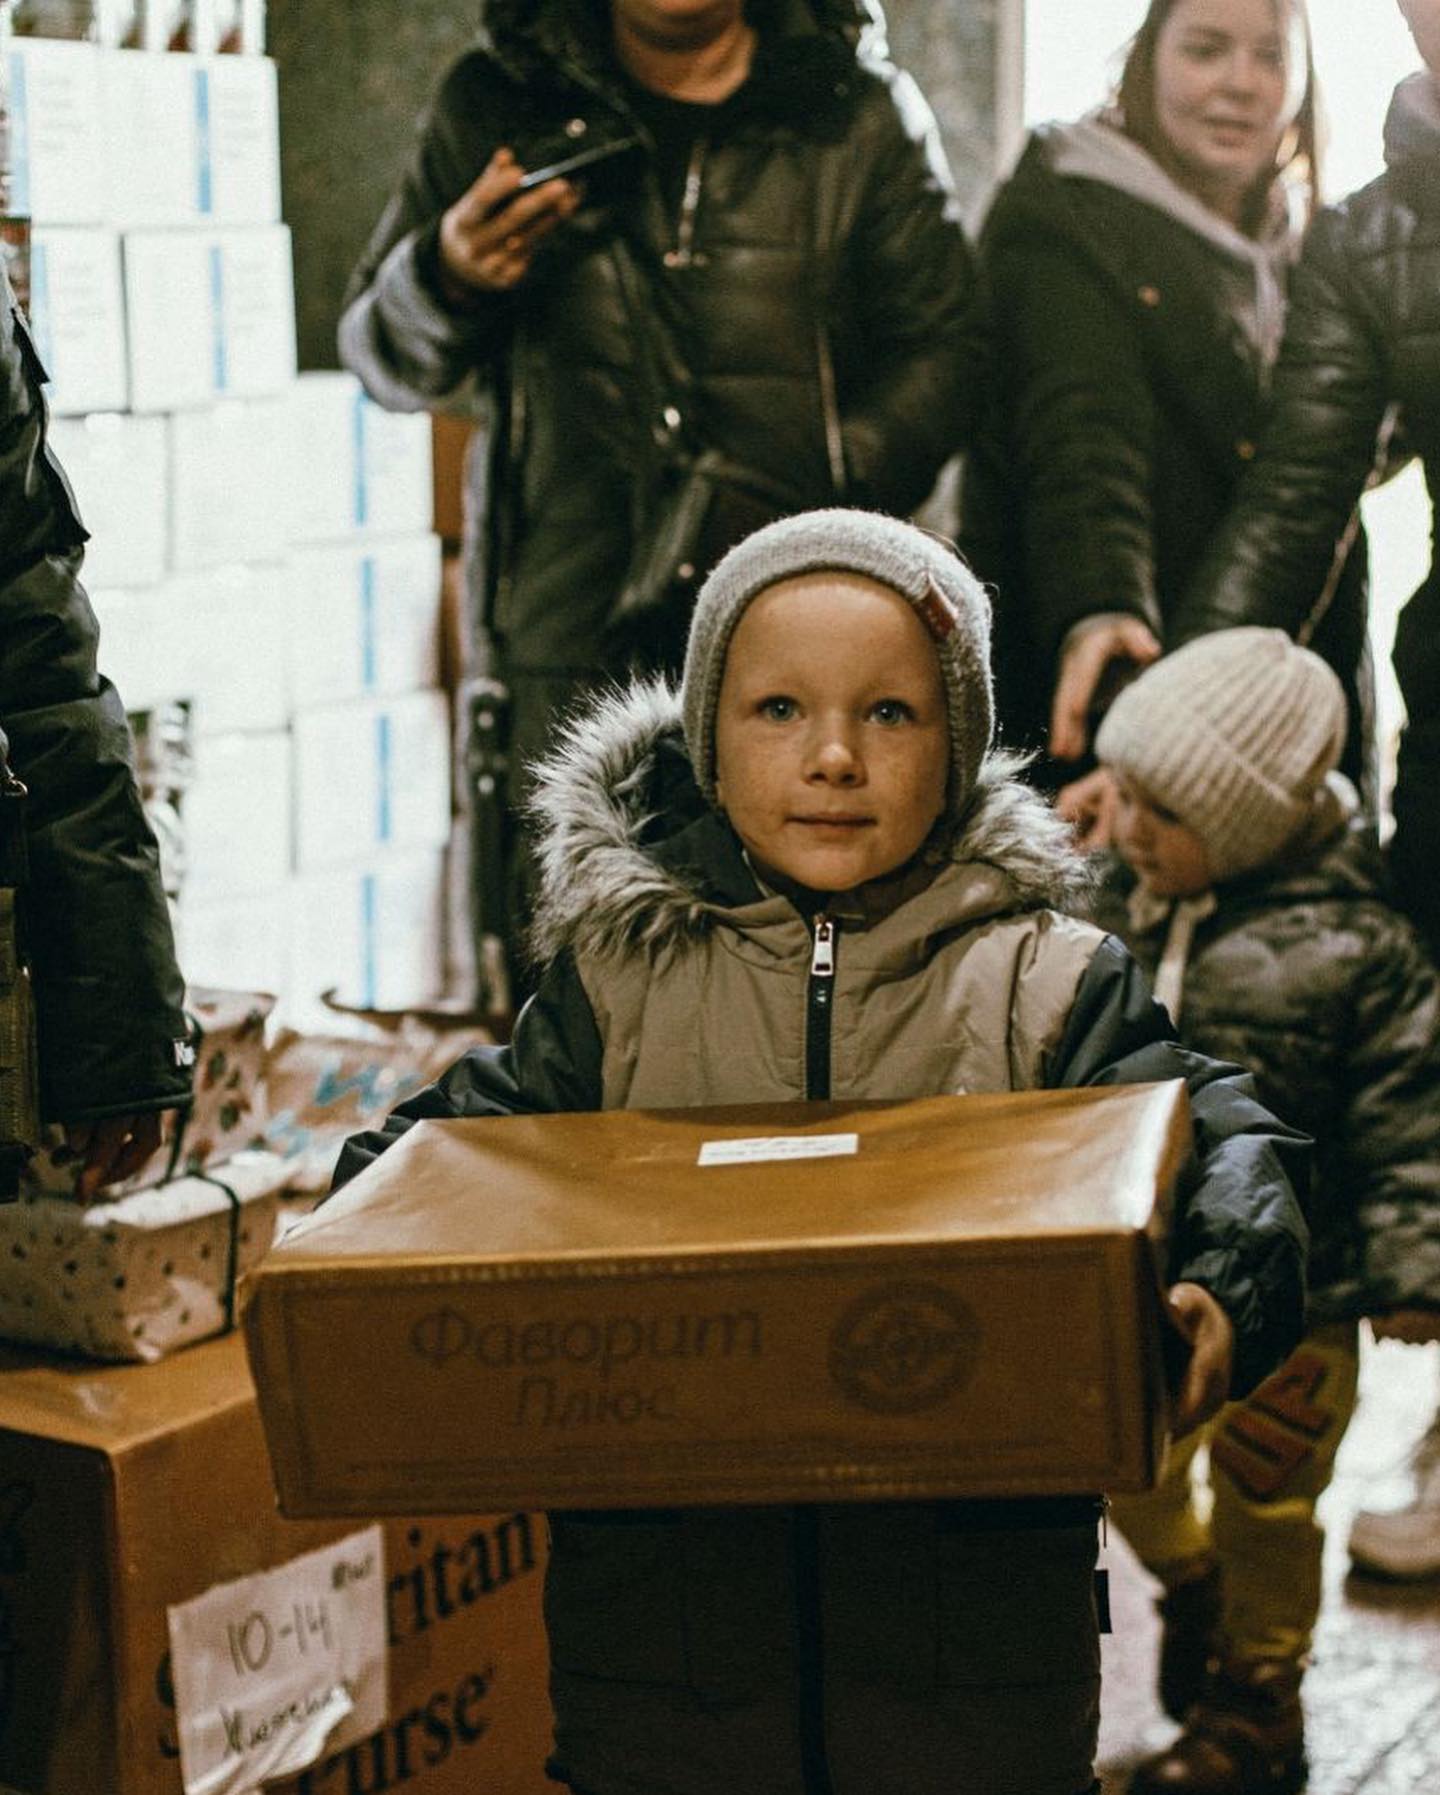 A young boy holding a box in front of a group of people.